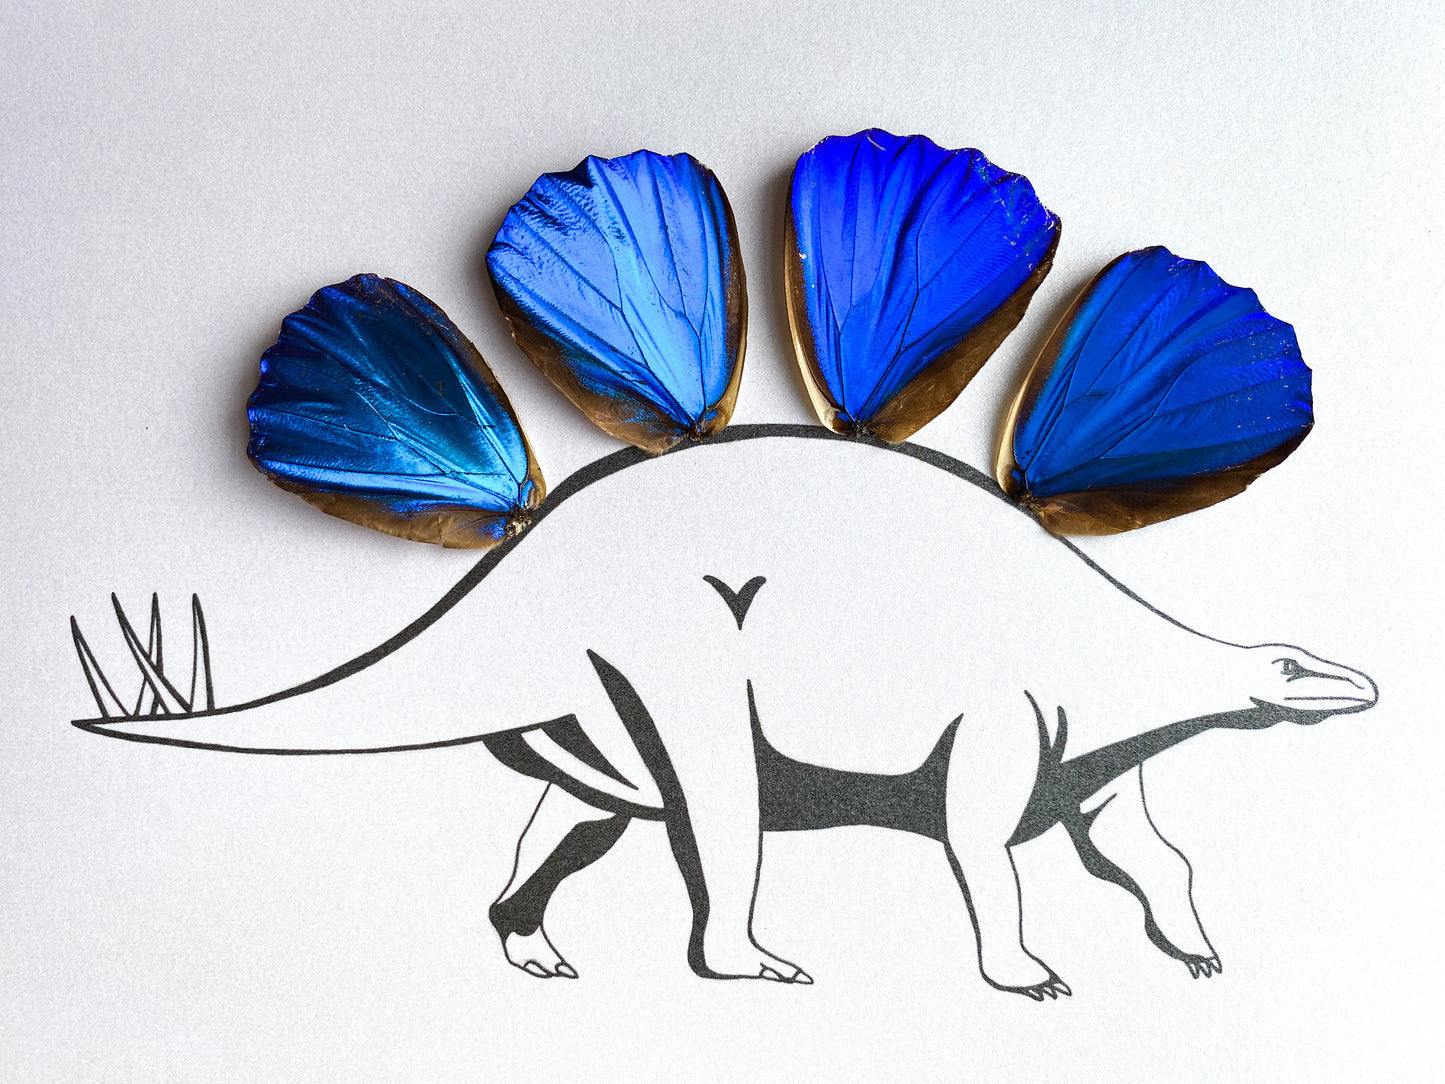 Dinosaur Stegosaurus Butterfly Wing Framed Art From and For Conservation